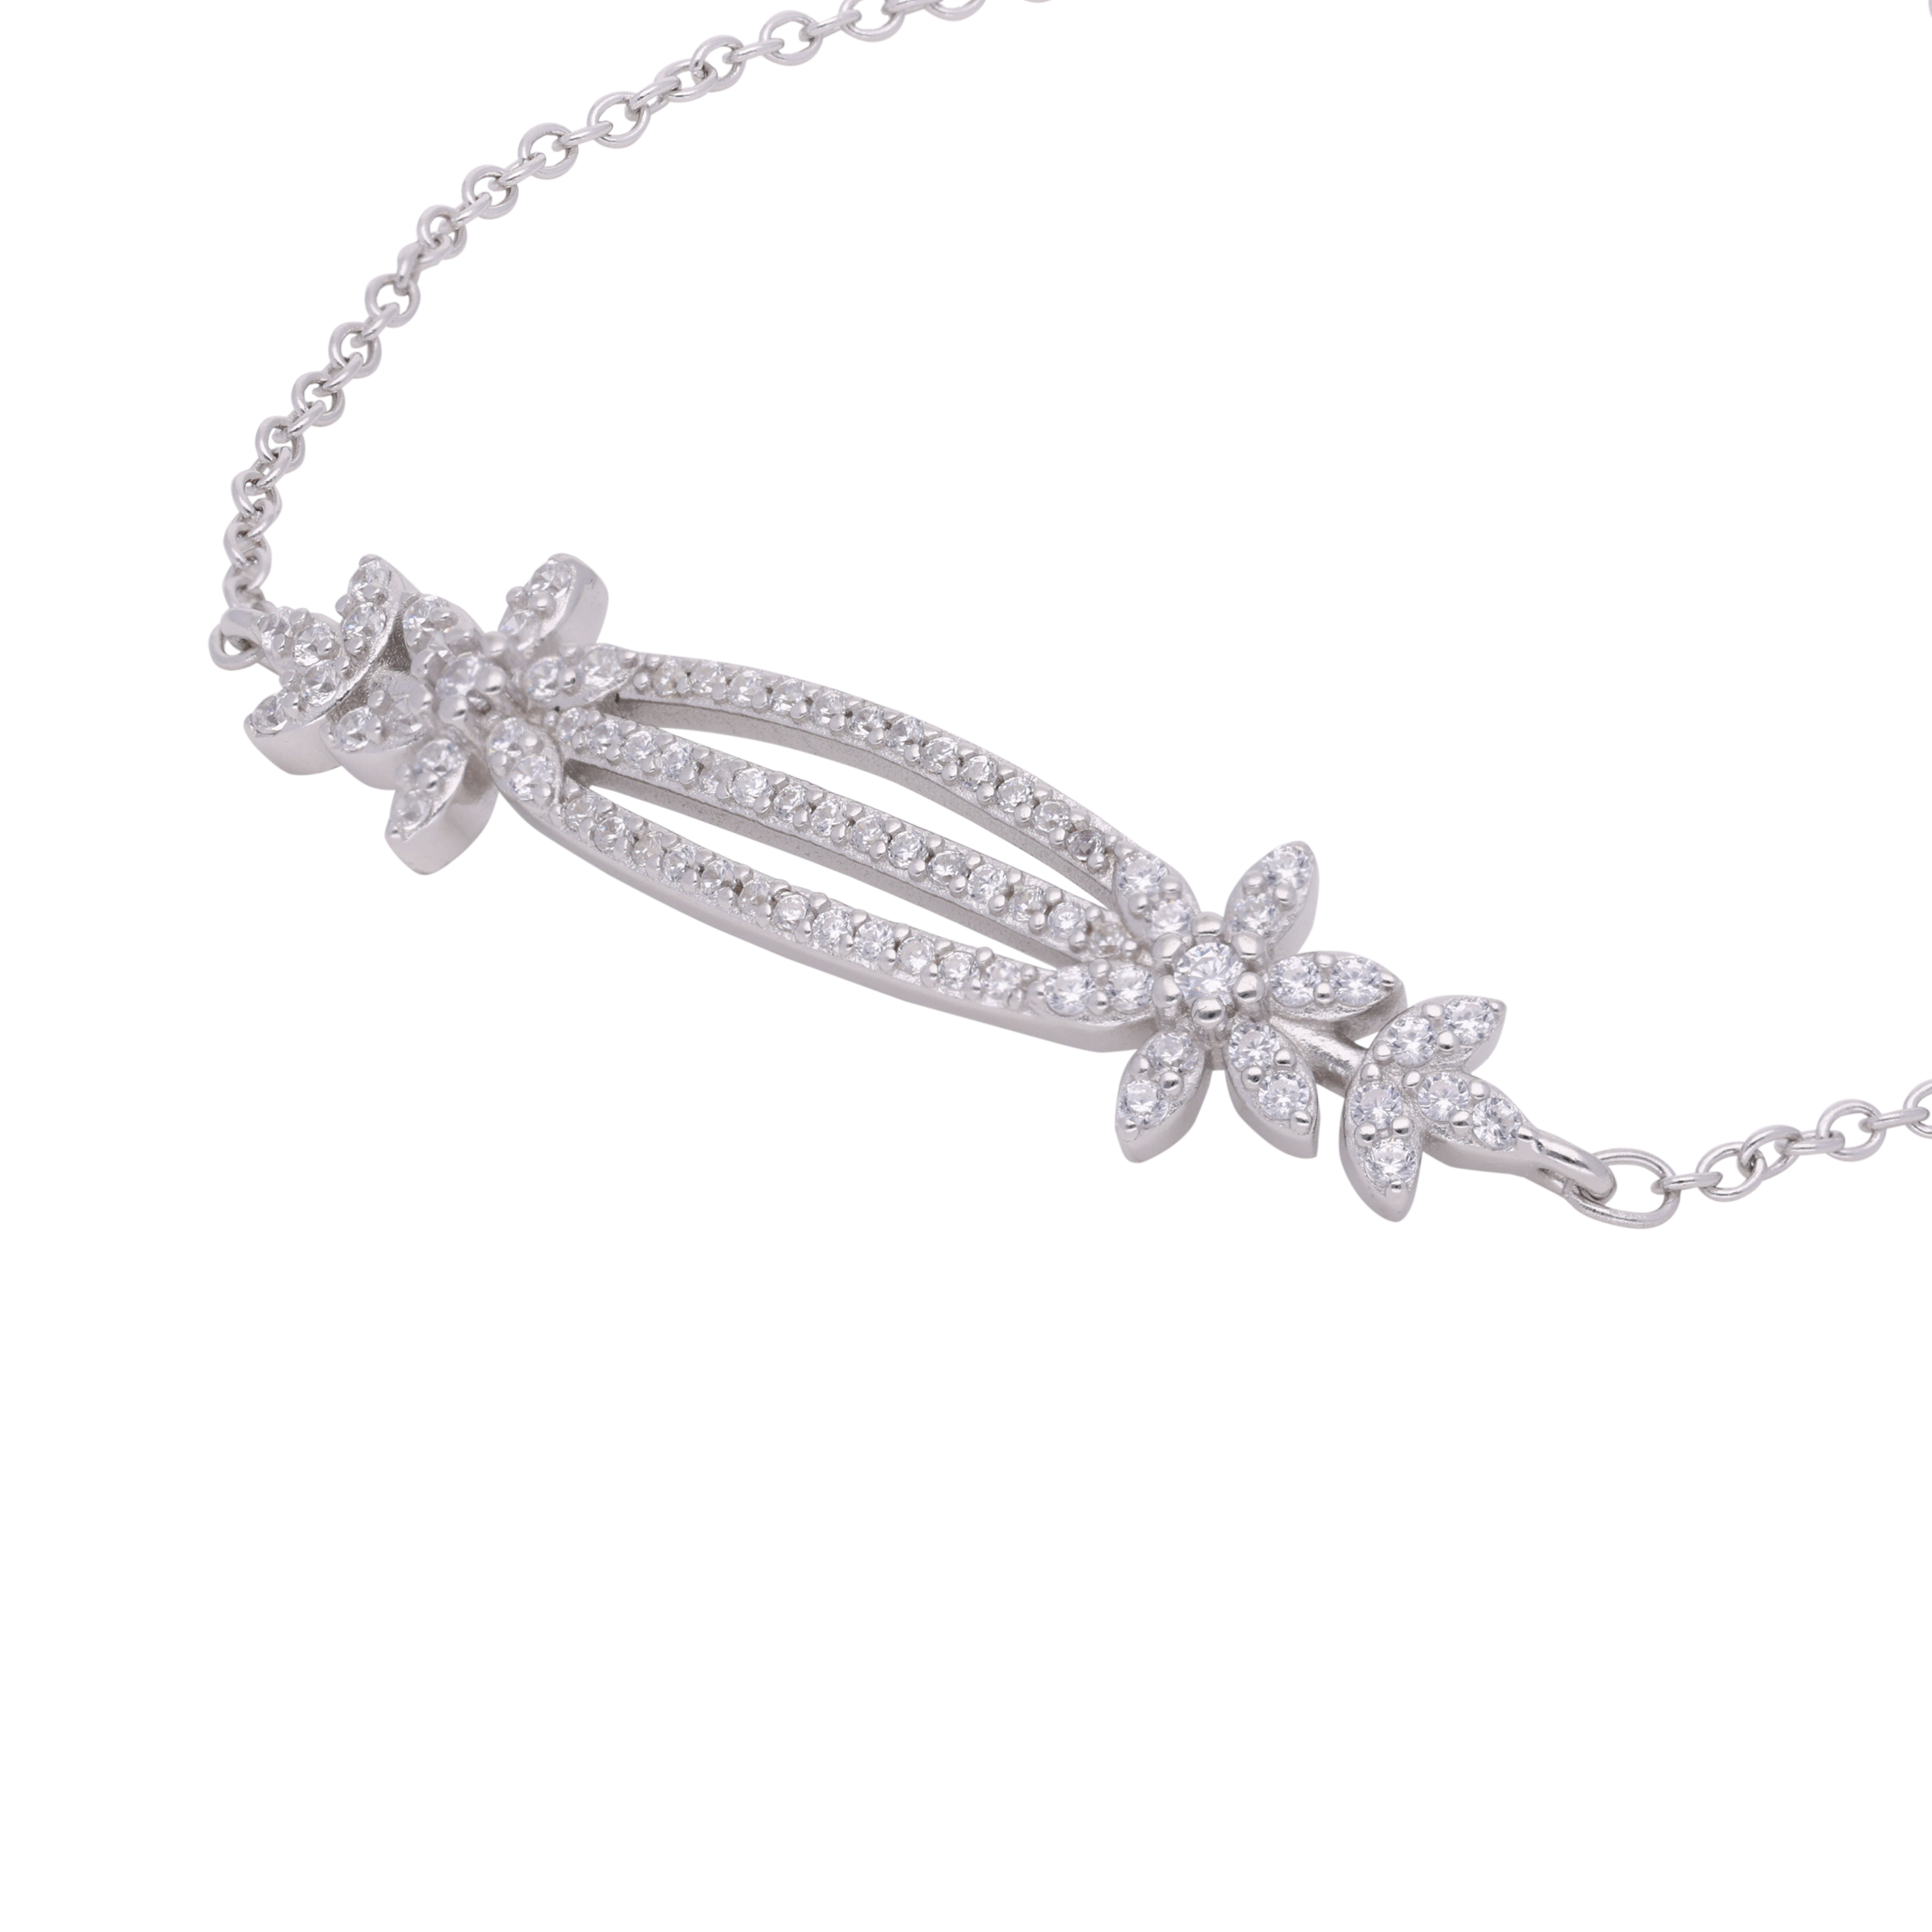 Sterling Silver Floral Design Chain Bracelet with Cubic Zirconia | SKU : 0003115329, 0003115282, 0003115367